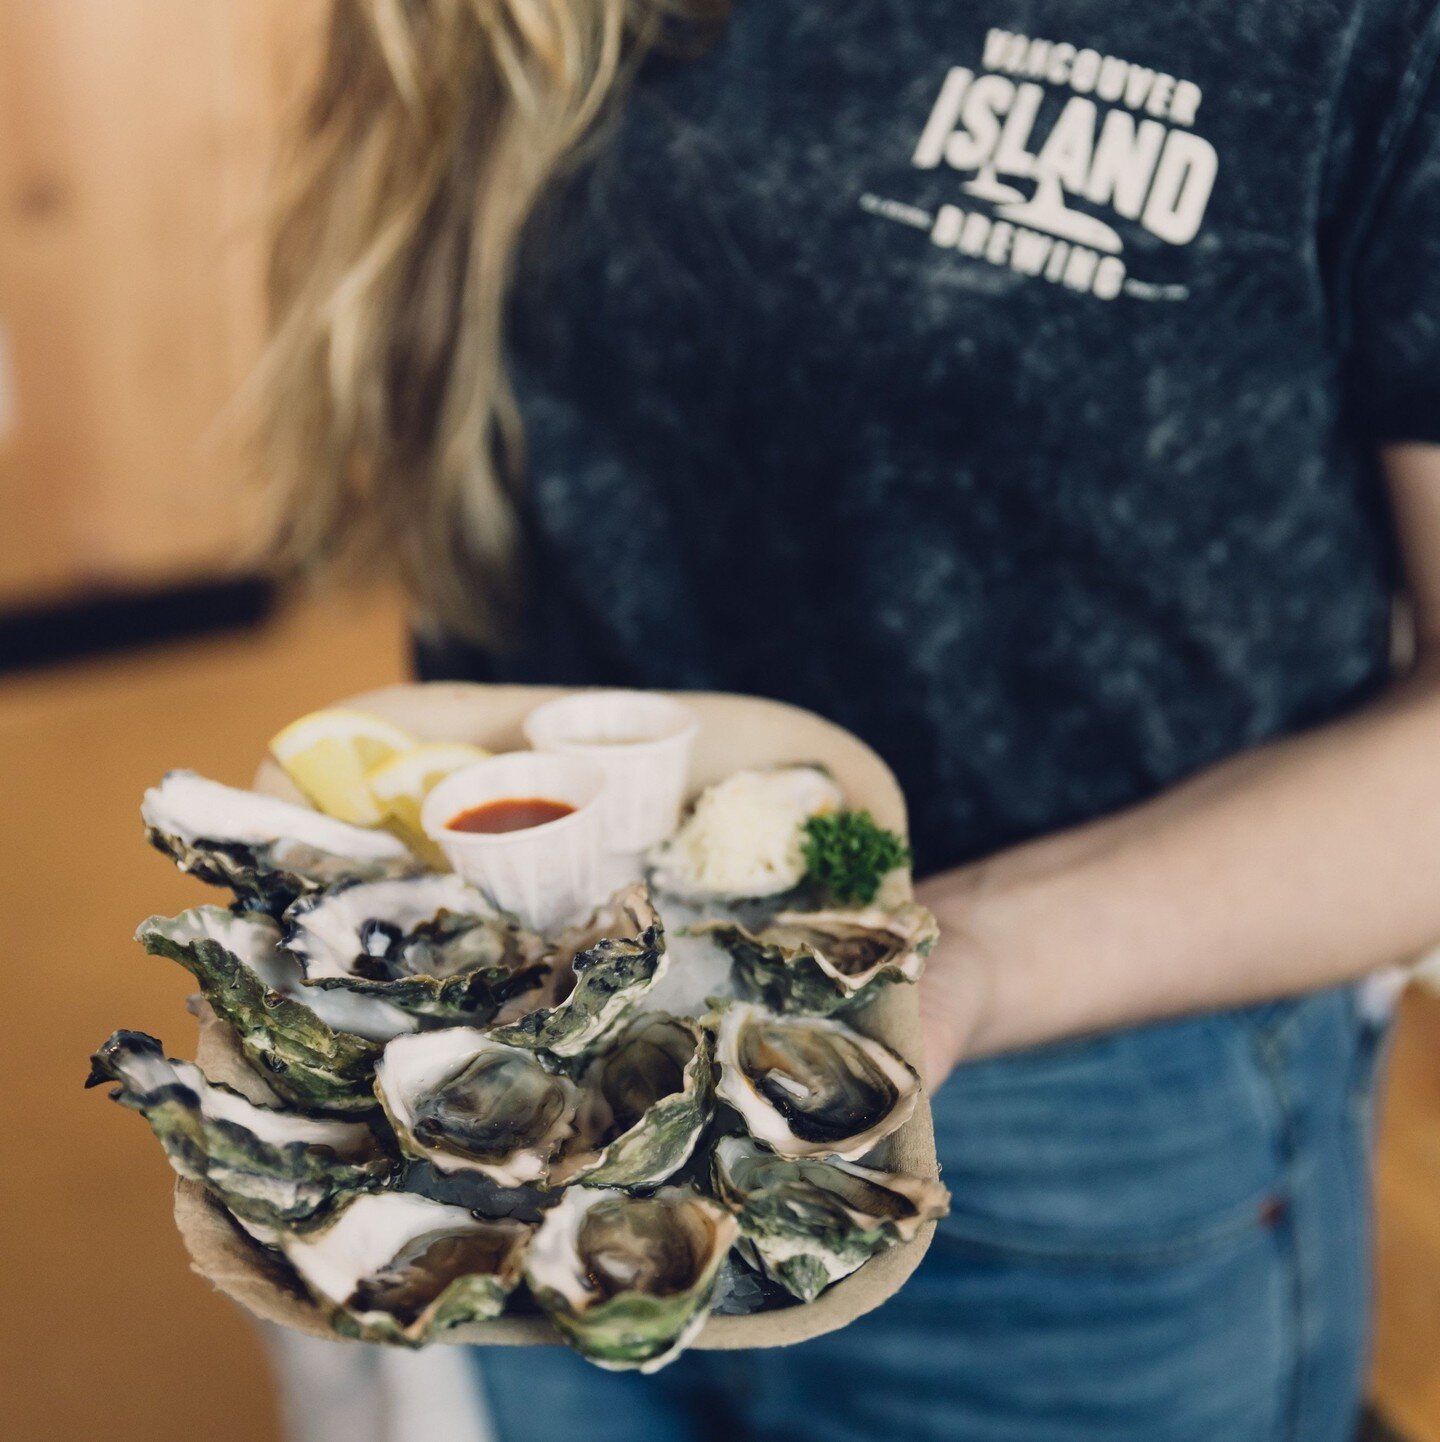 Oysters?  West Coast Trail IPA?  Tonight?⁠
🦪🌲🍻⁠
⁠
Tonight's the night for A Toast to the Coast! ⁠
Grab a pint of the new West Coast Trail IPA, enjoy some fresh @WanderingMollusk oysters, and take in the scenic views of @Ryantidman 's coastal photo